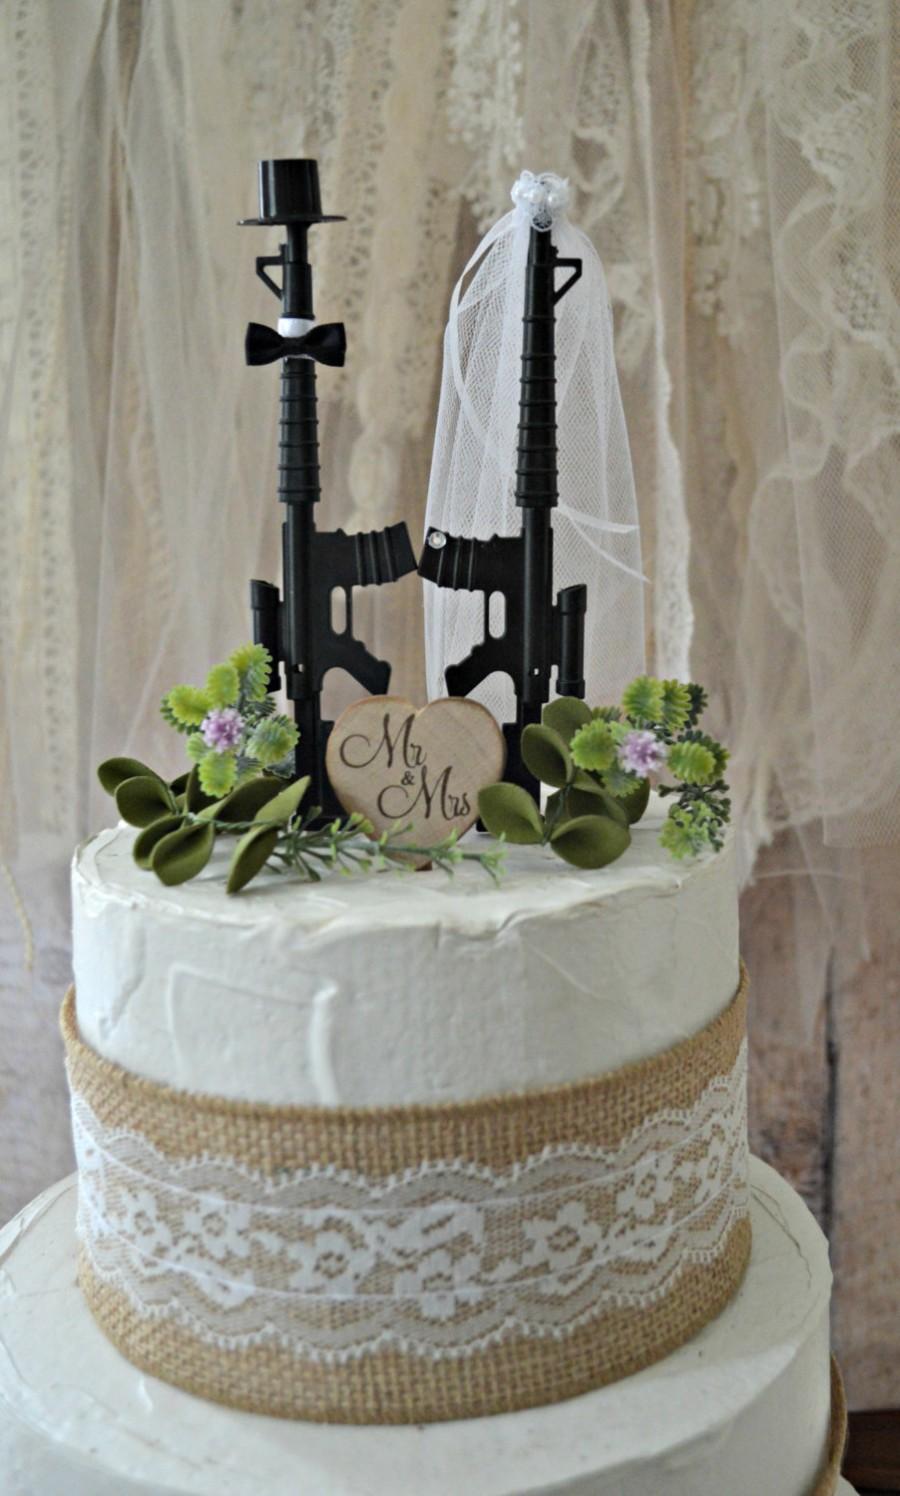 Свадьба - Machine gun weapon wedding cake topper army police themed hunting groom's cake Mr & Mrs sing the hunt is over gun decorations military sign